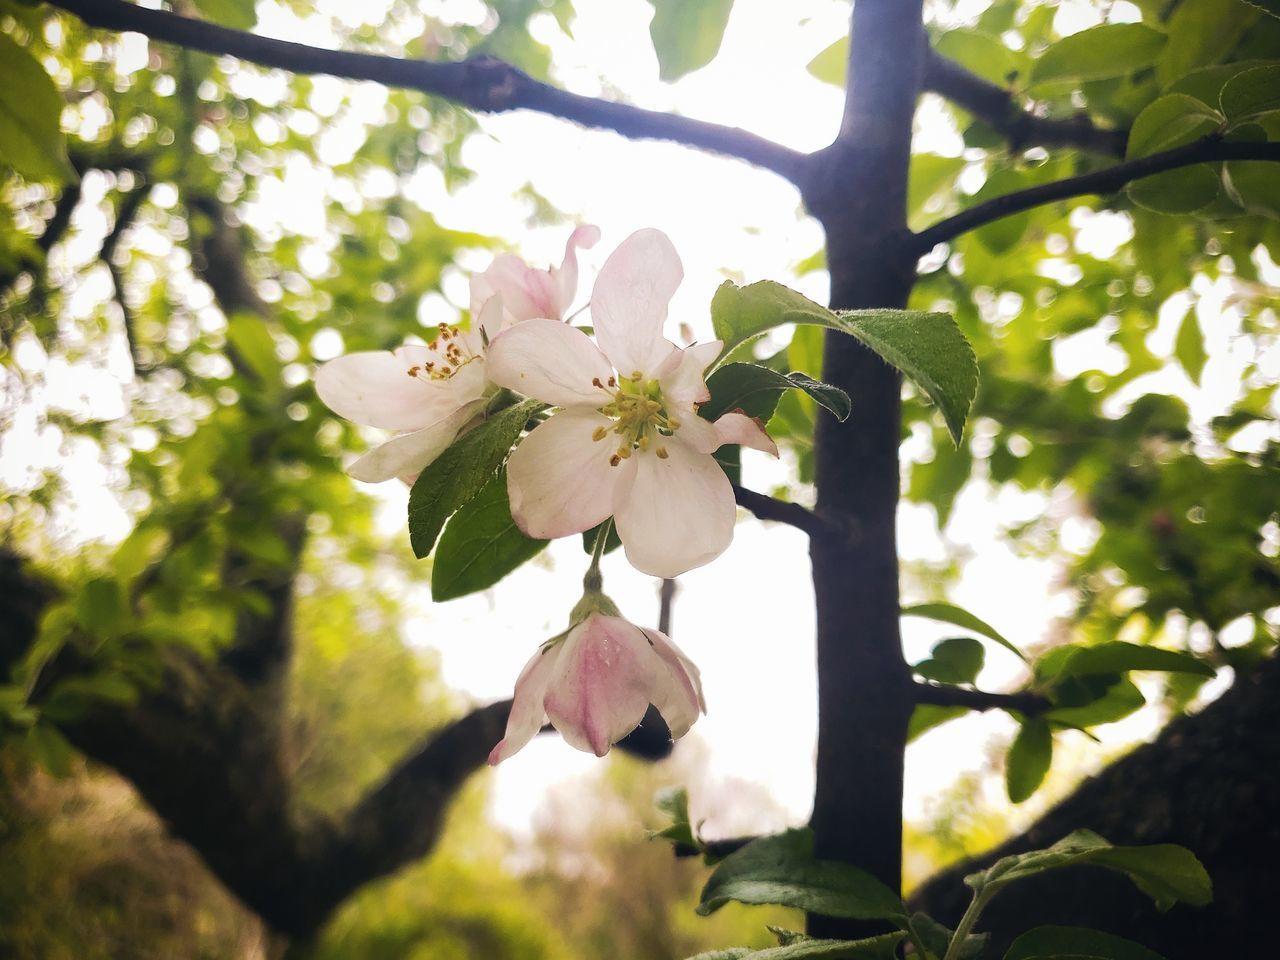 plant, flowering plant, flower, growth, beauty in nature, fragility, freshness, vulnerability, tree, petal, nature, blossom, close-up, branch, pink color, day, no people, outdoors, springtime, fruit tree, flower head, cherry blossom, pollen, cherry tree, spring